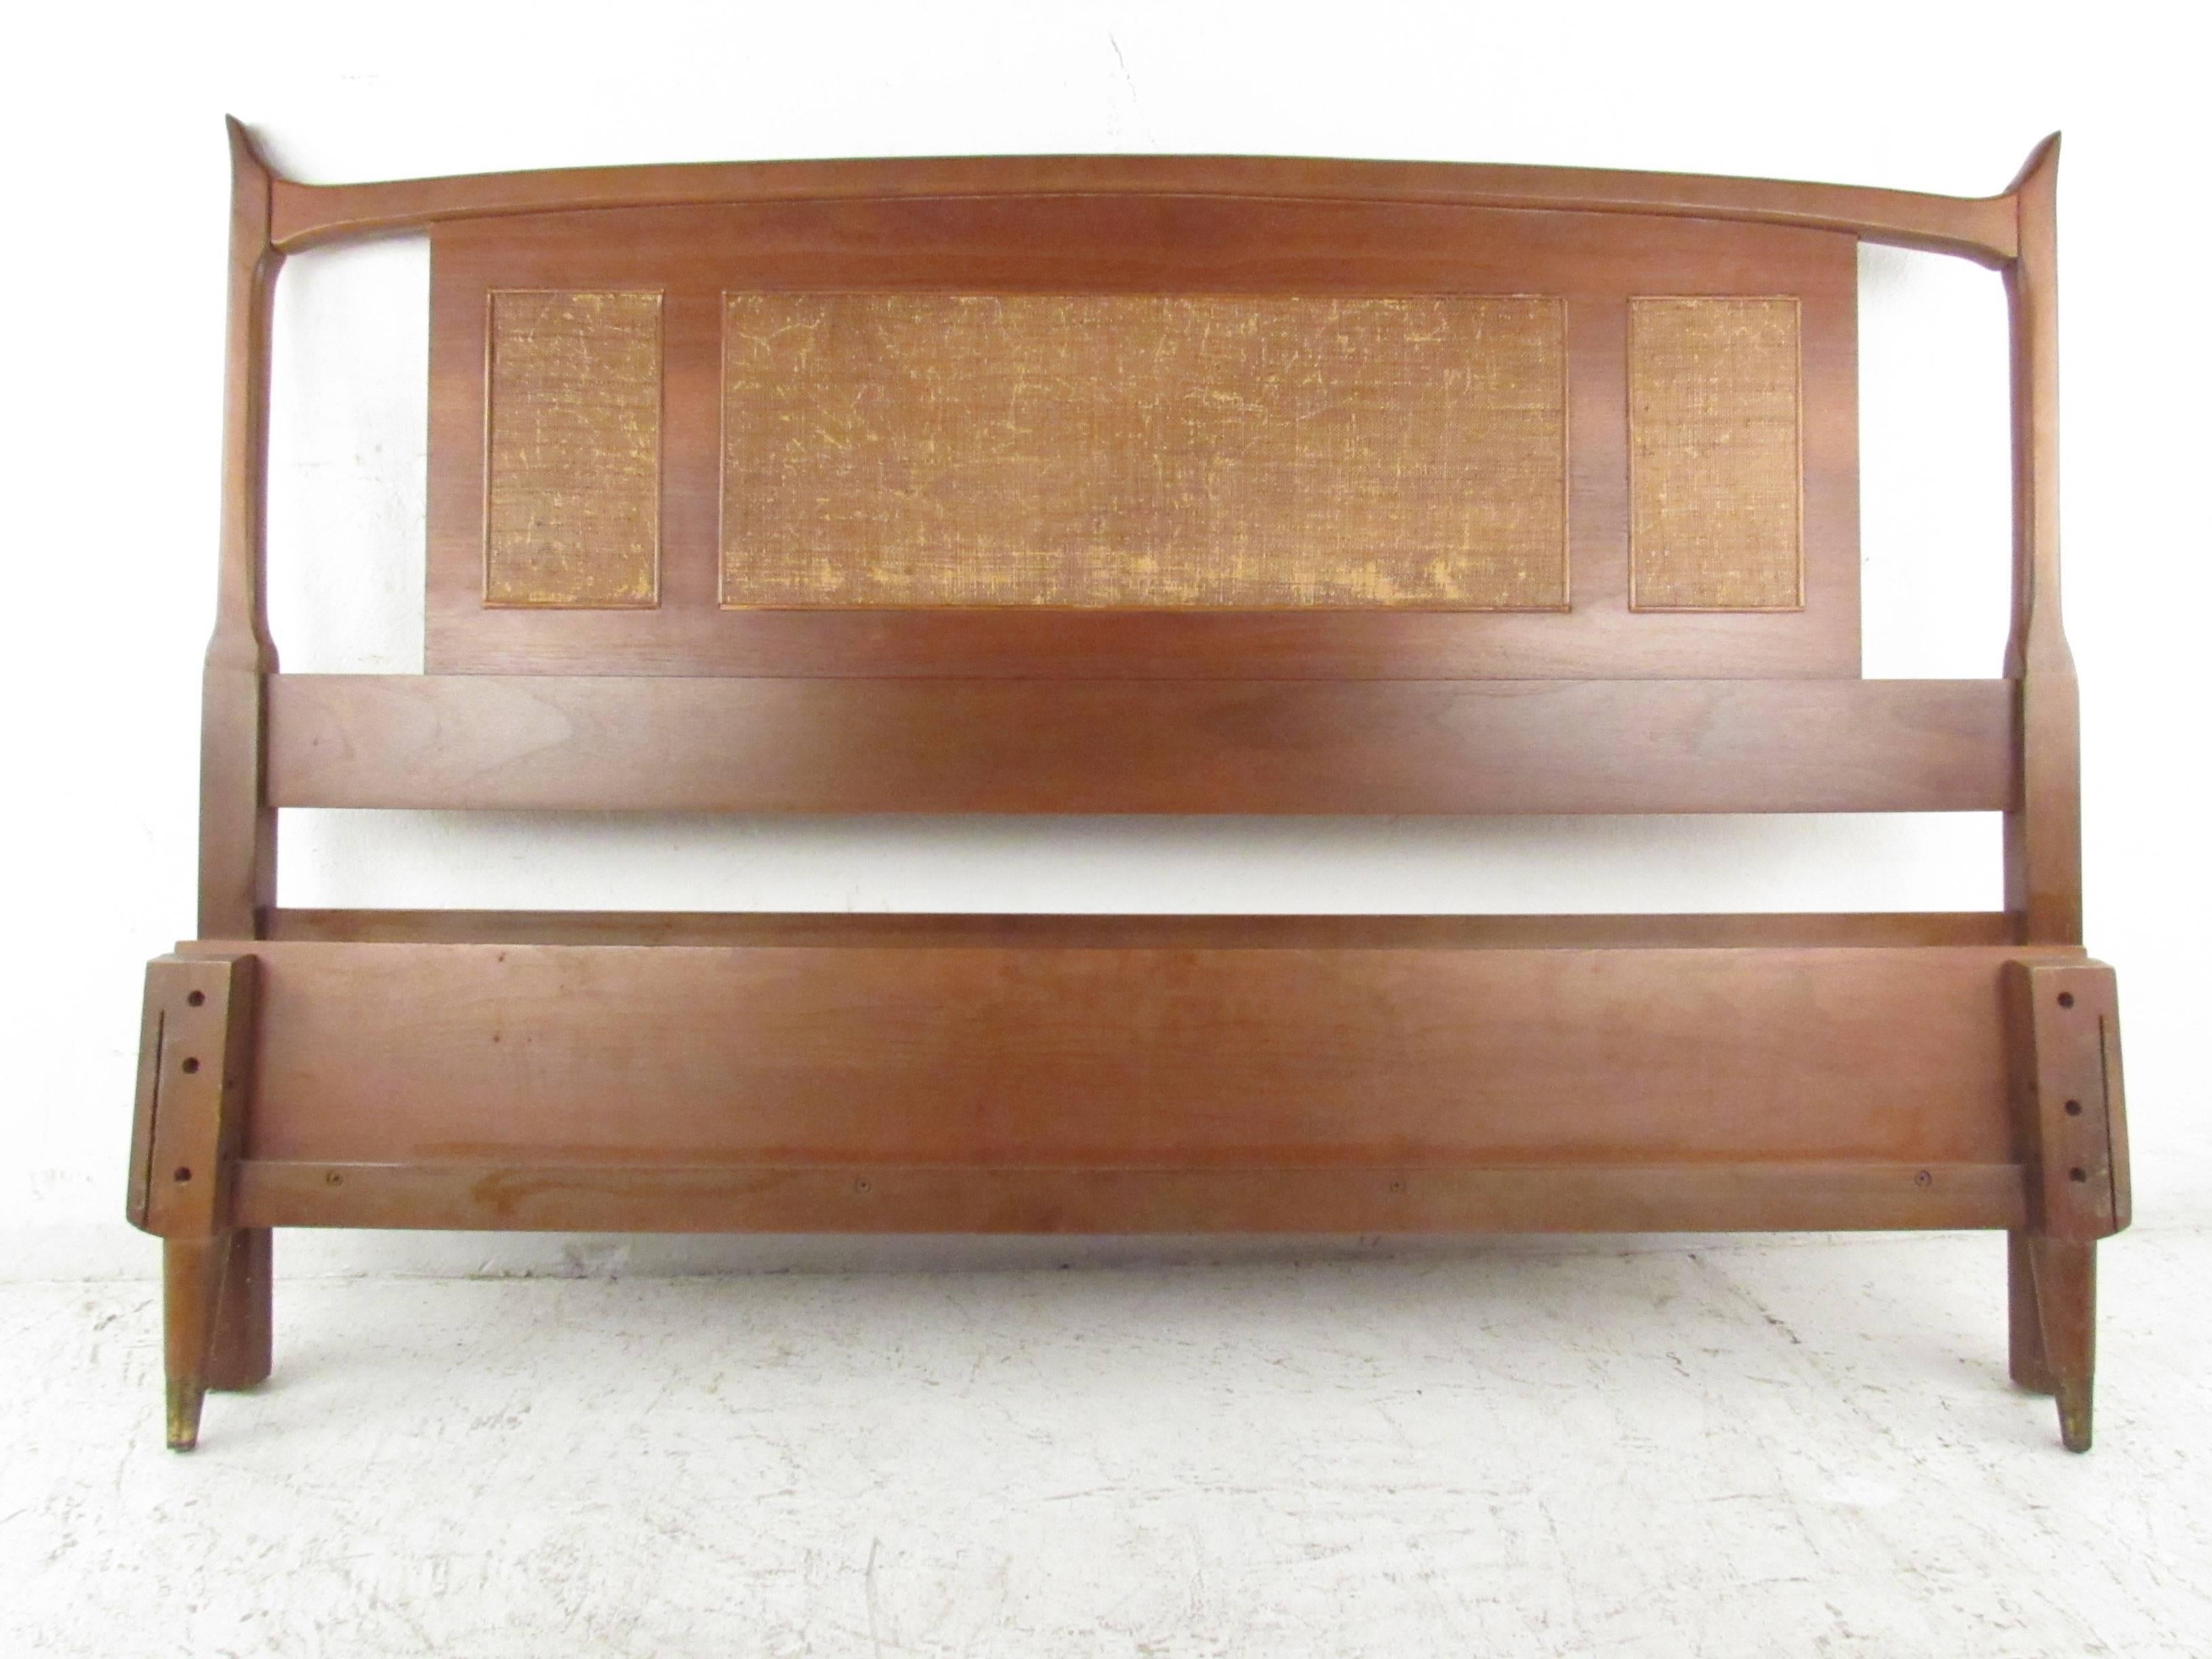 This unique vintage walnut full size headboard features a unique sculpted shape with cane front details. Includes matching foot board. Please confirm item location (NY or NJ).